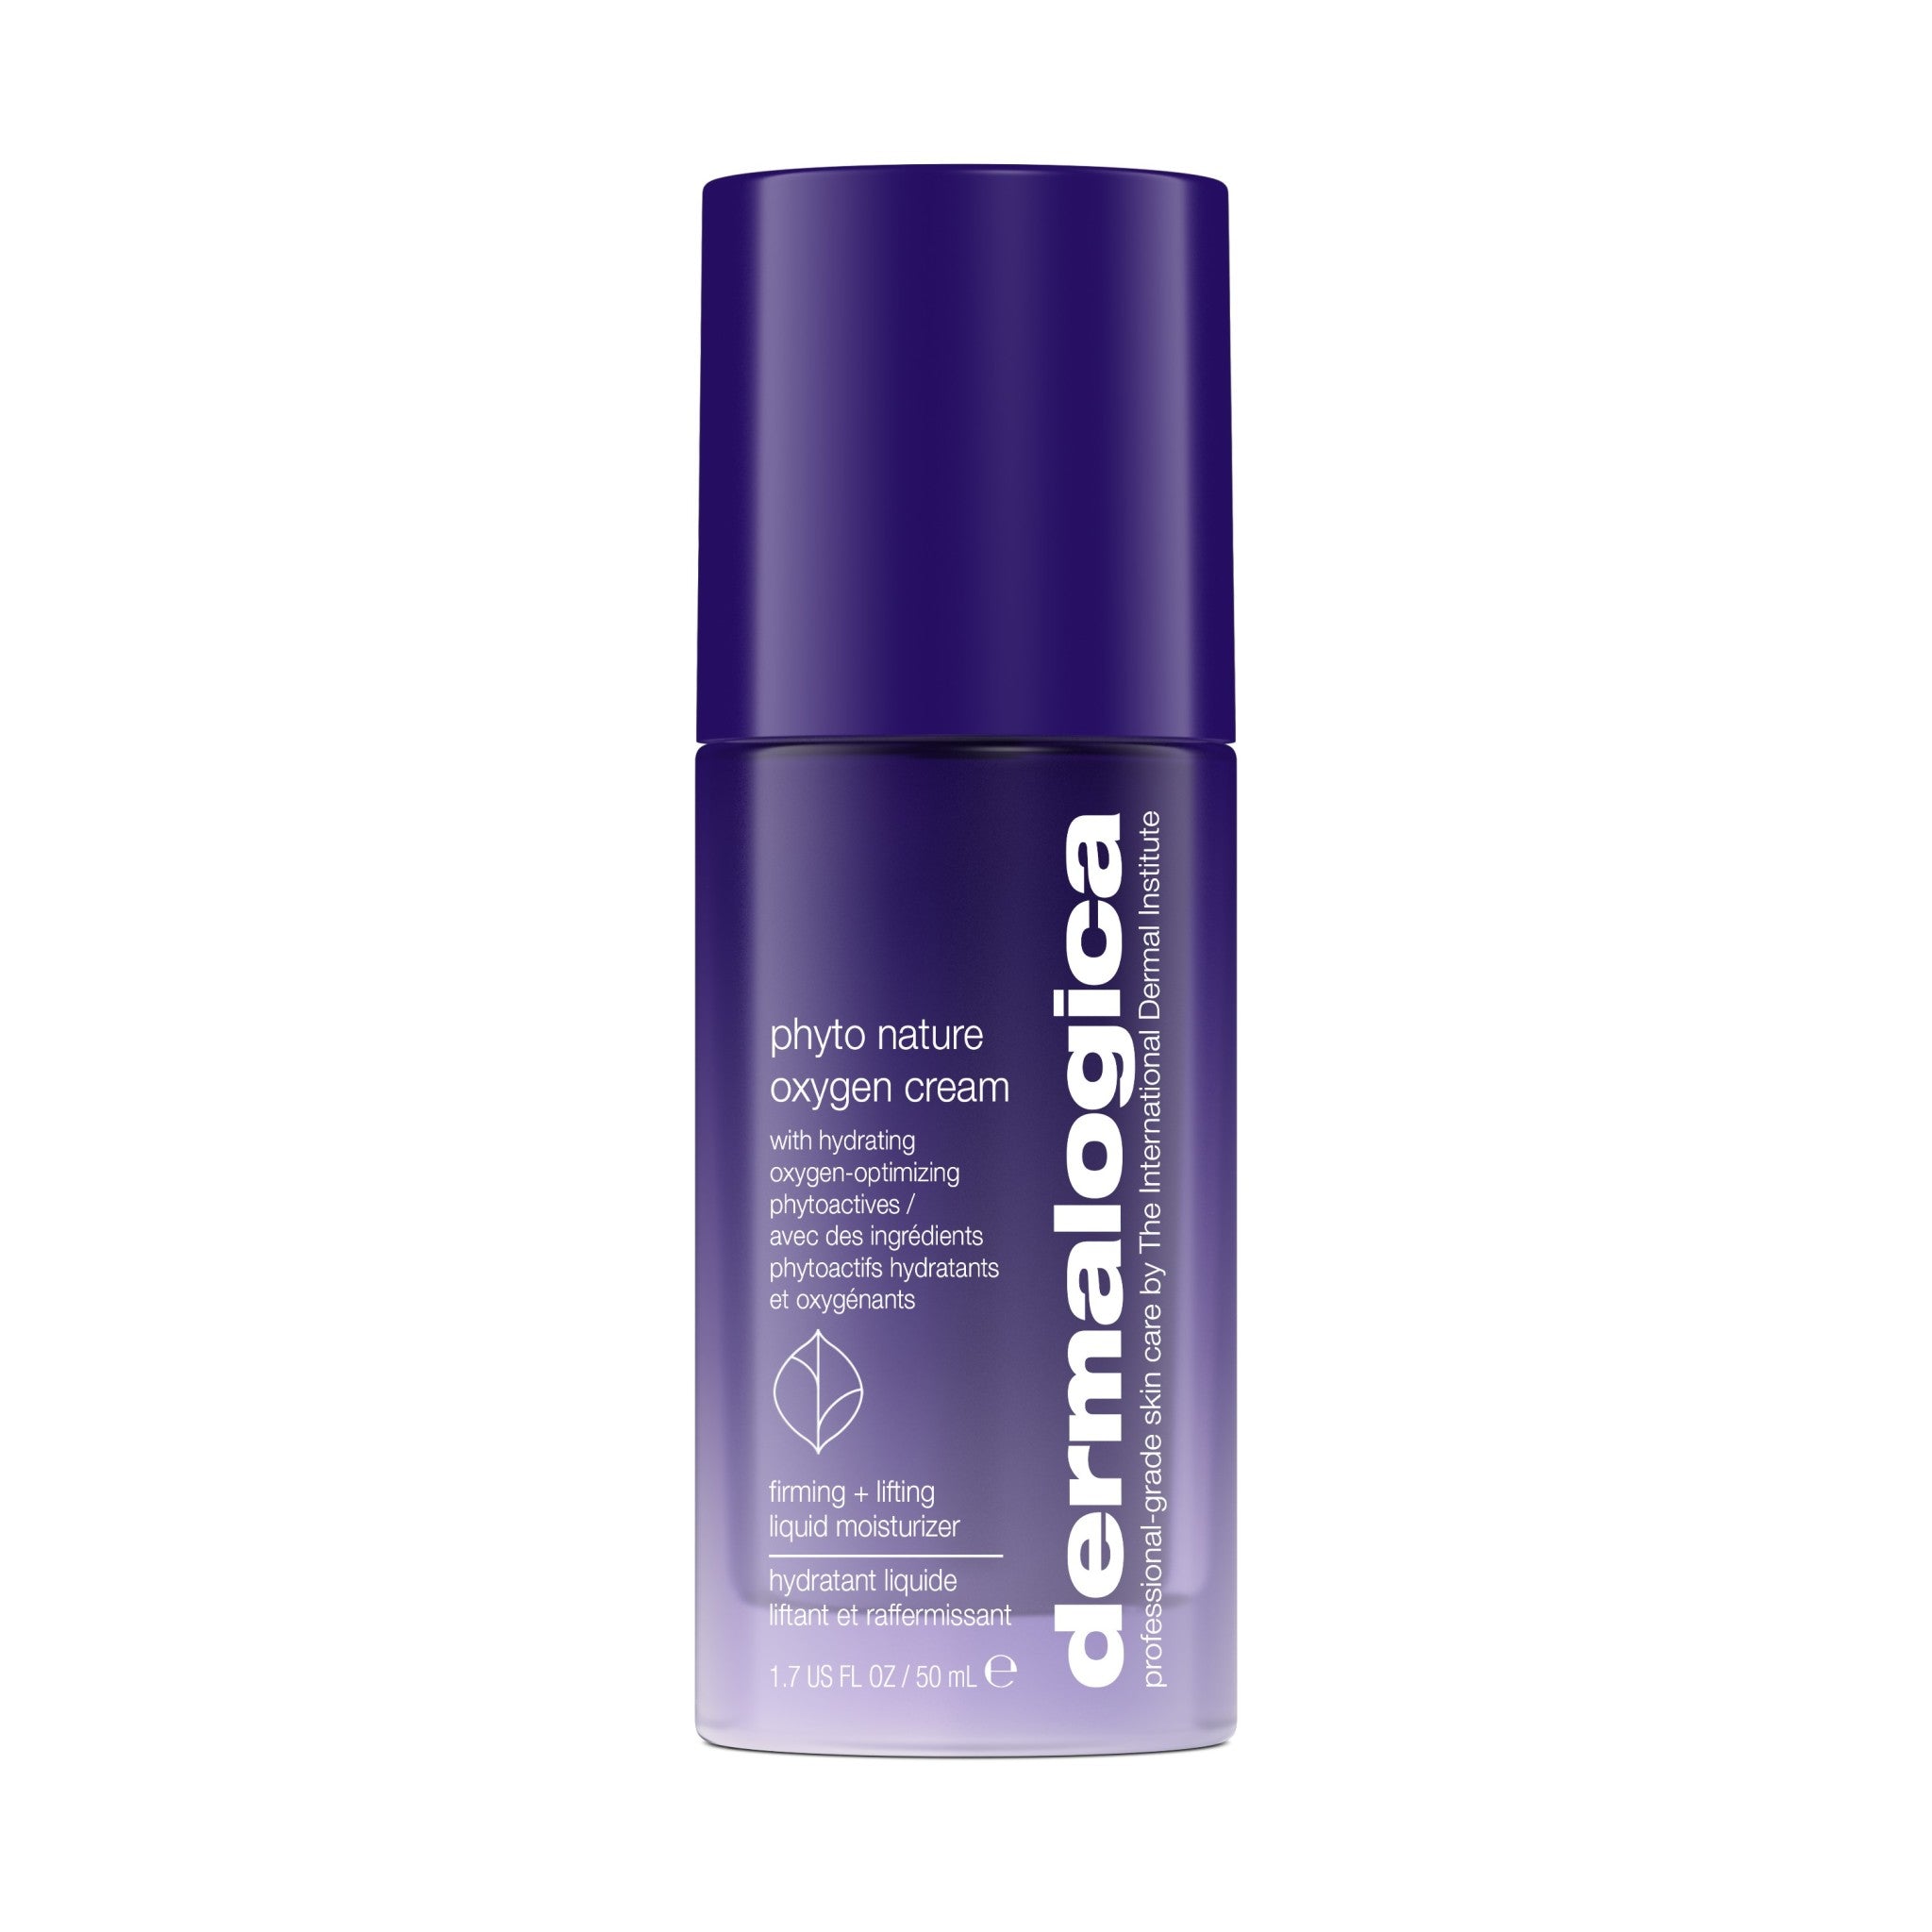 Dermalogica Phyto Nature Oxygen Cream Color/Shade variant: main image.